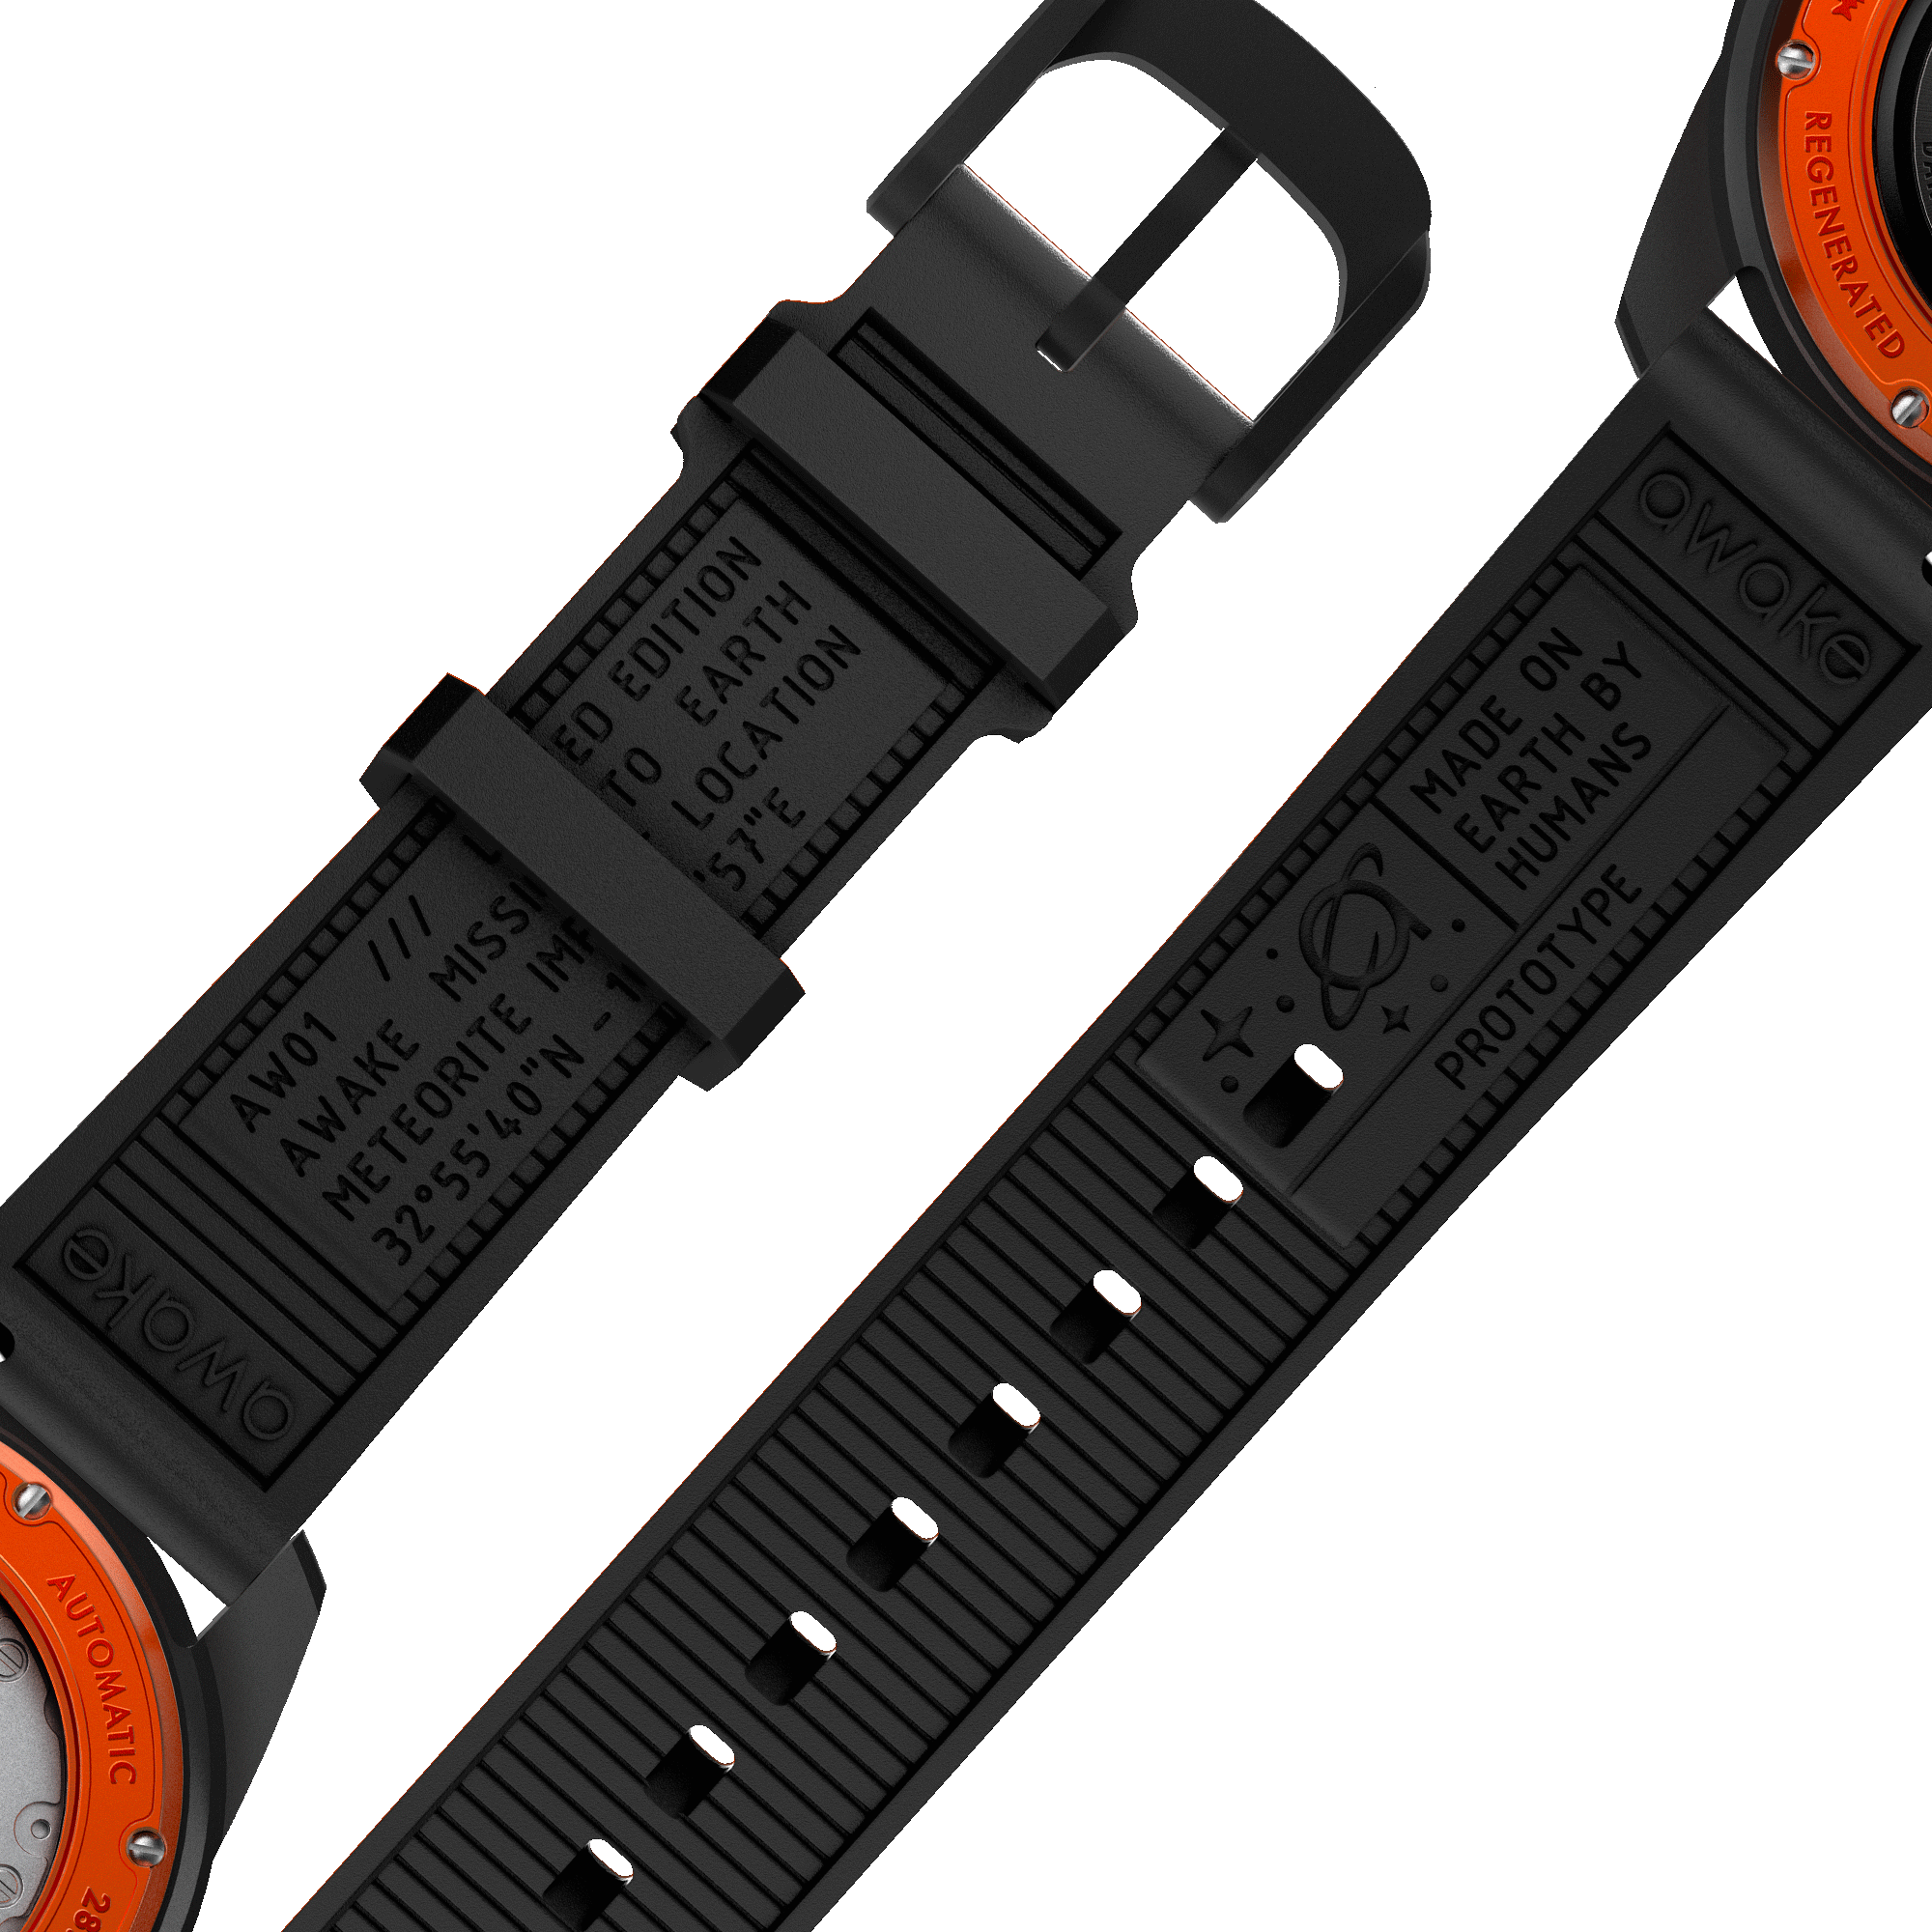 STRAP MISSION TO EARTH BIOPOLY BLACK